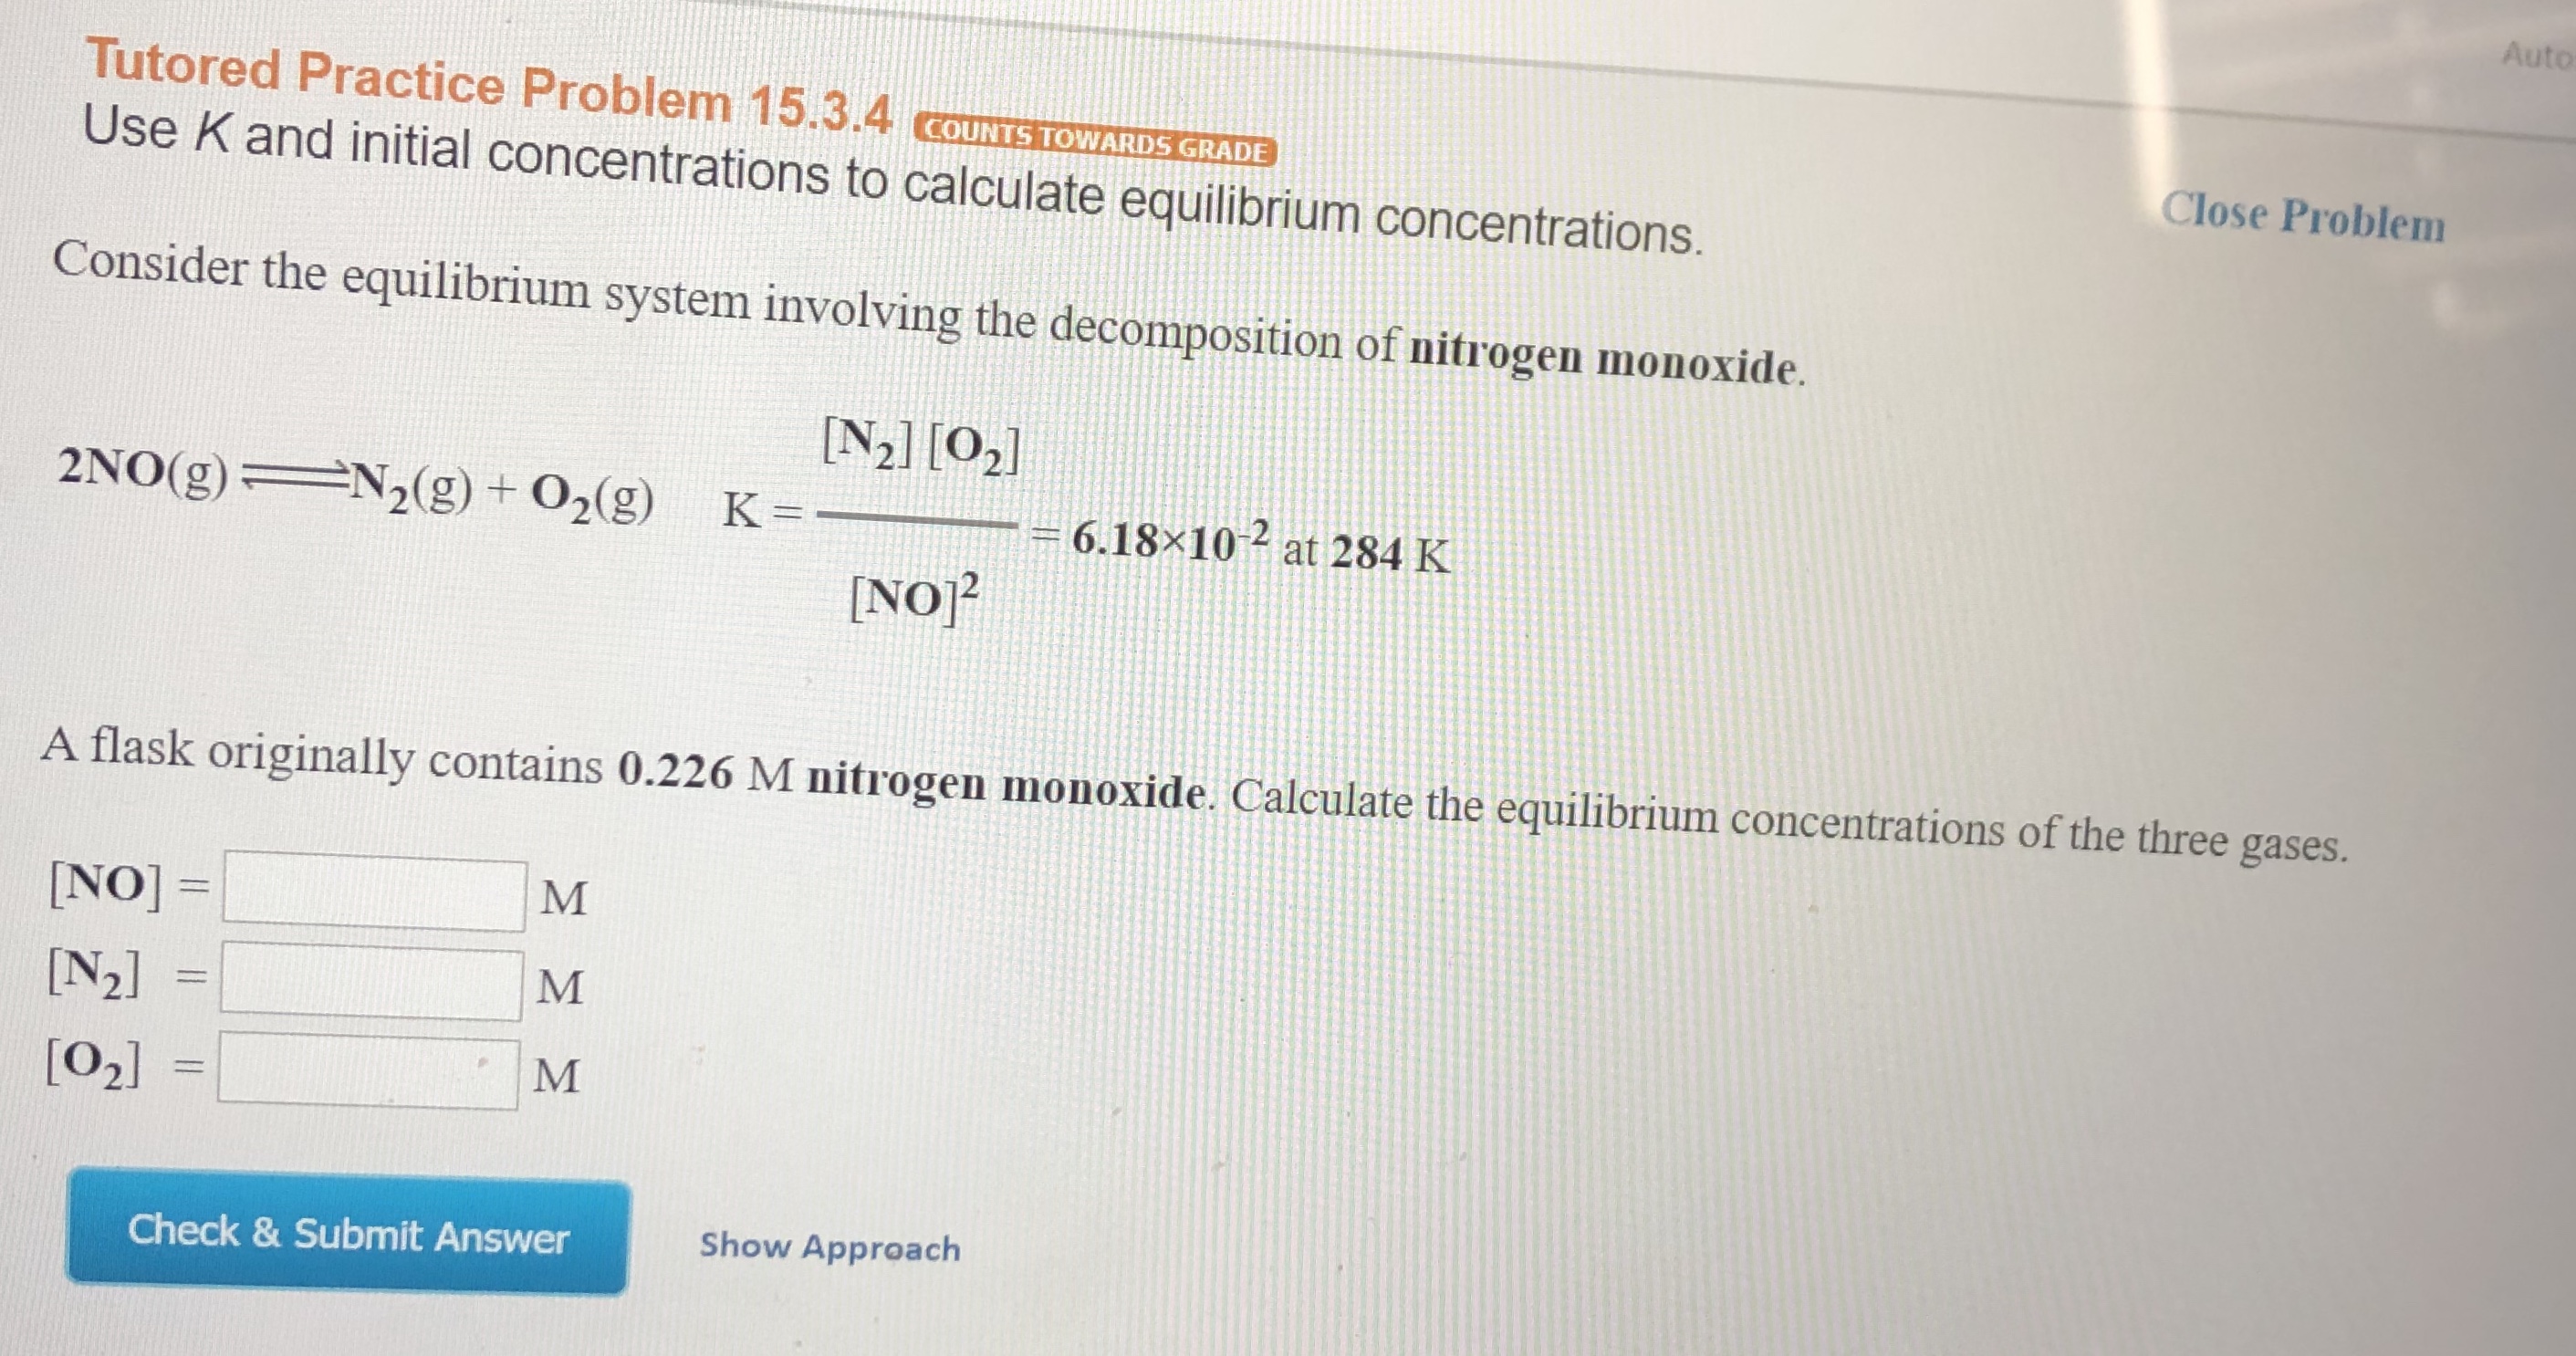 Auto
Tutored Practice Problem 15.3.4 cOUNTS TOWARDS GRADE
Close Problem
Use K and initial concentrations to calculate equilibrium concentrations.
Consider the equilibrium system involving the decomposition of nitrogen monoxide.
N2] [02
N2(g) + 02(g)
2NO(g)
K =
6.18x10
at 284 K
[NO2
A flask originally contains 0.226 M nitrogen monoxide. Calculate the equilibrium concentrations of the three gases.
M
NO]=
[N2]
M
[02]
Show Approach
Check & Submit Answer
